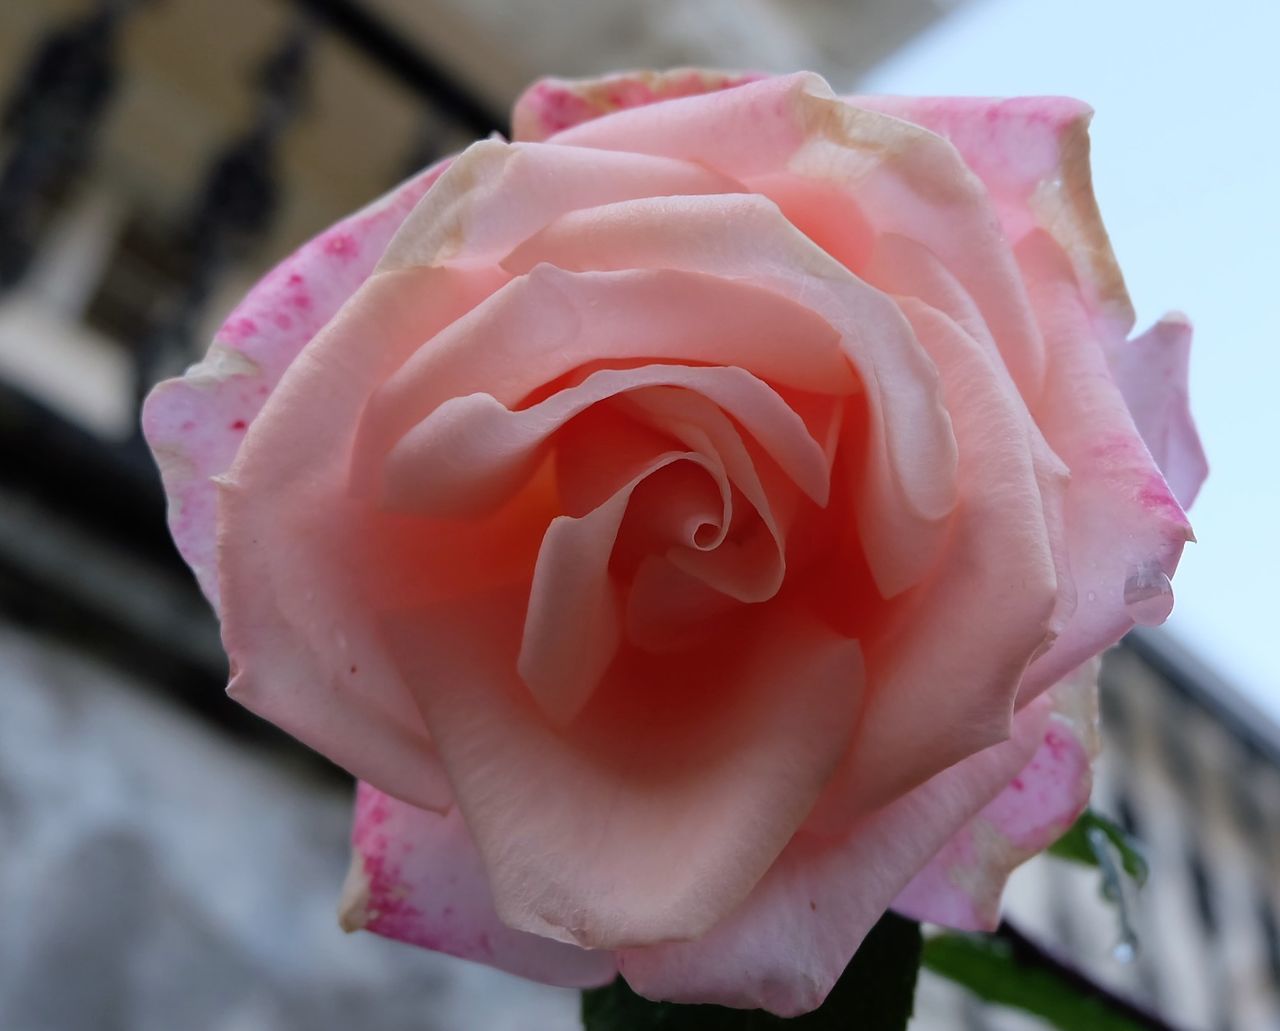 CLOSE-UP OF PINK ROSE WITH FLOWER